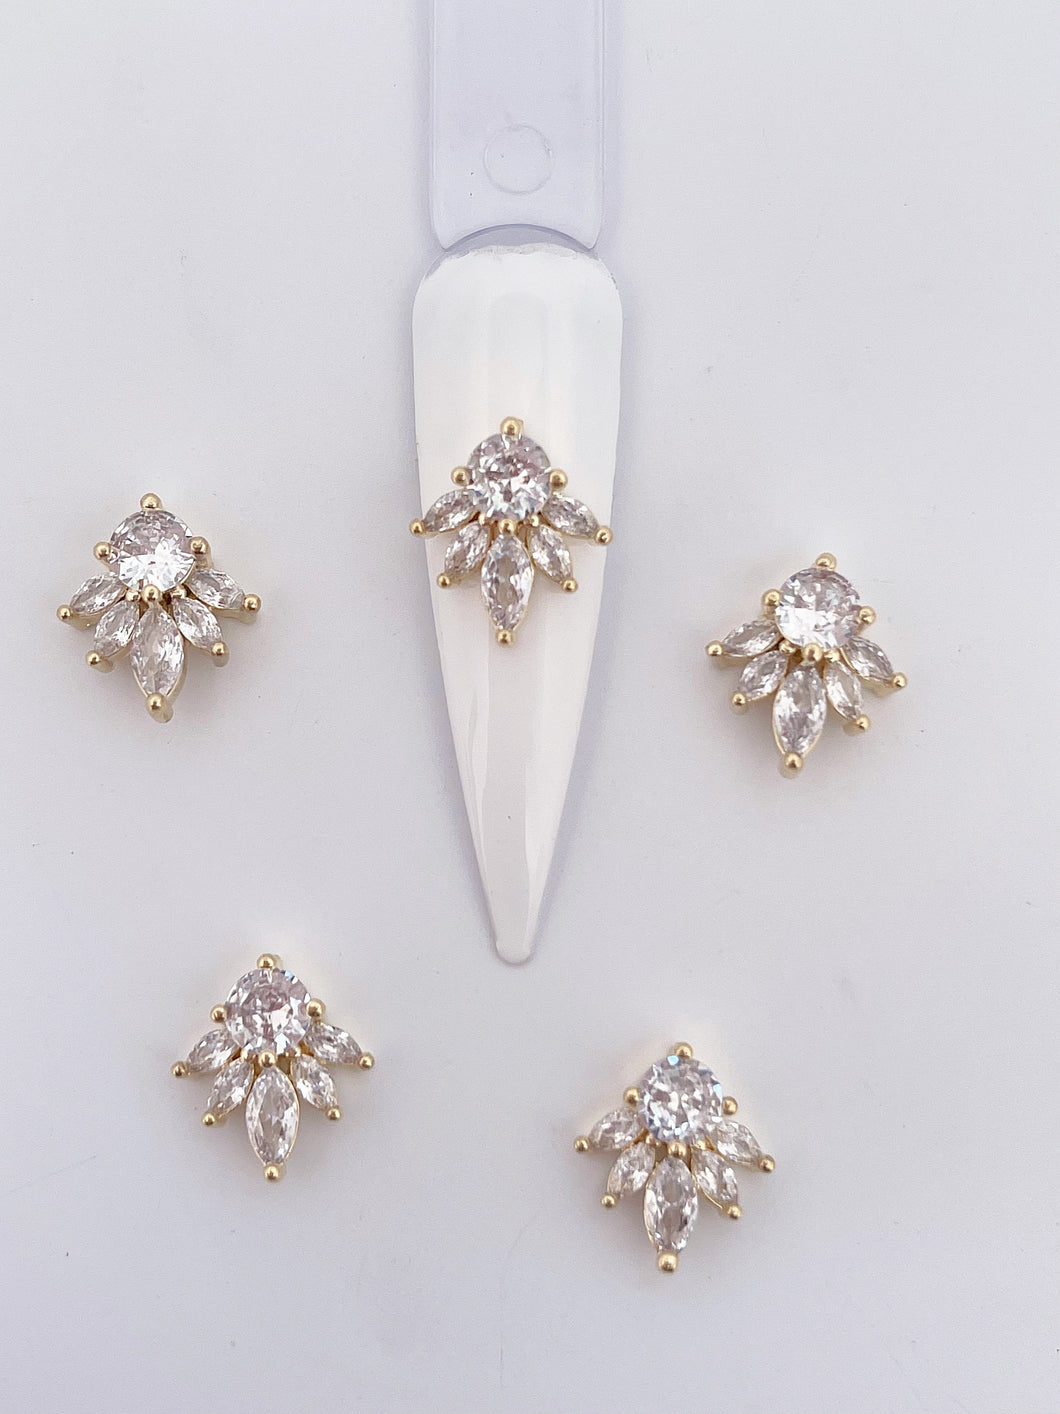 3D Zircon Nail Charms #41 (5 Pieces)